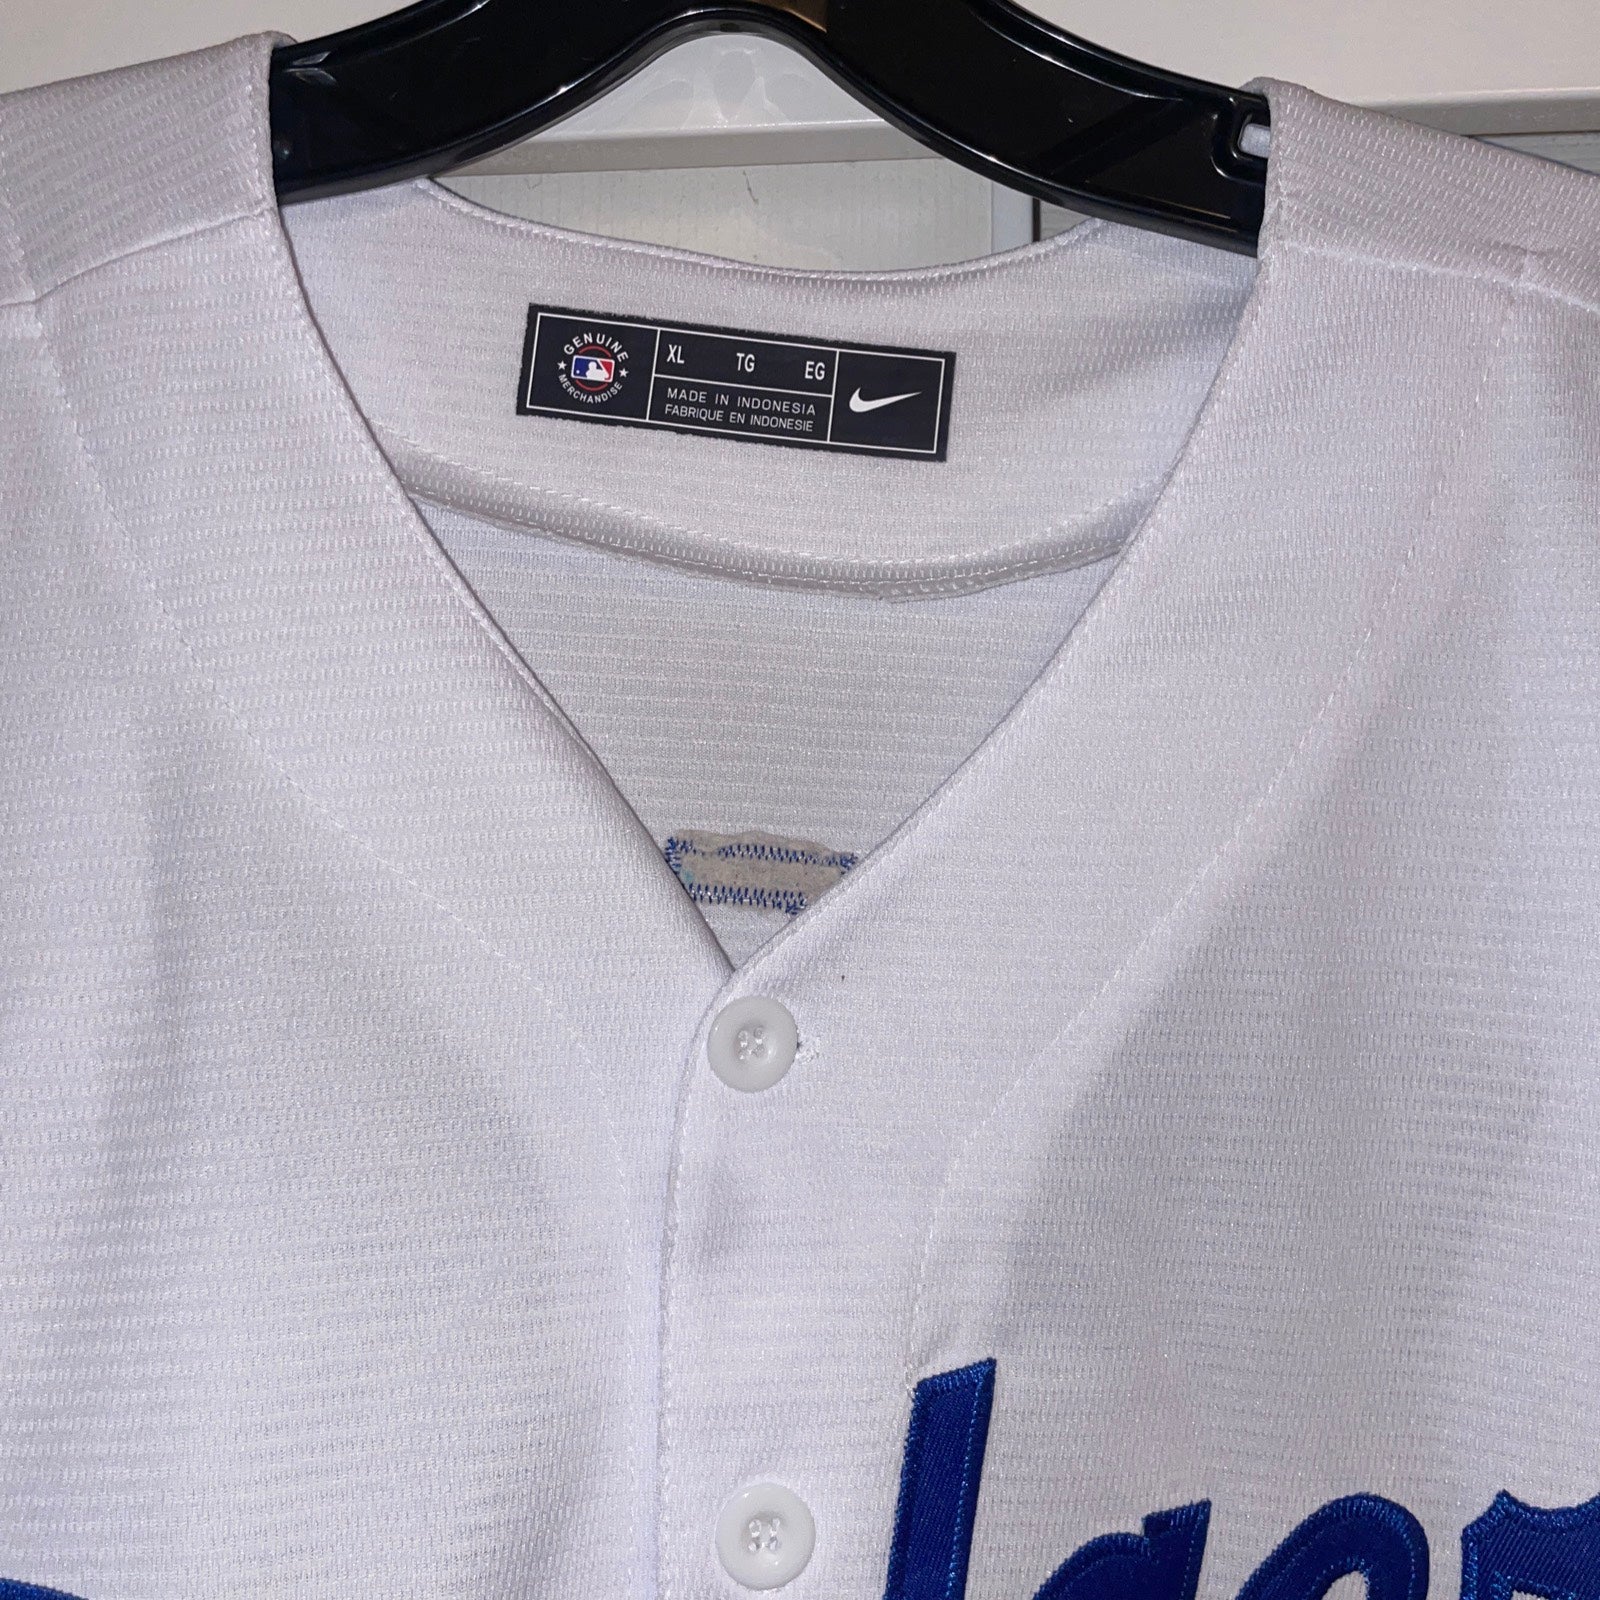 Dodger Authentic Jersey Size 48 Freddie Freeman for Sale in